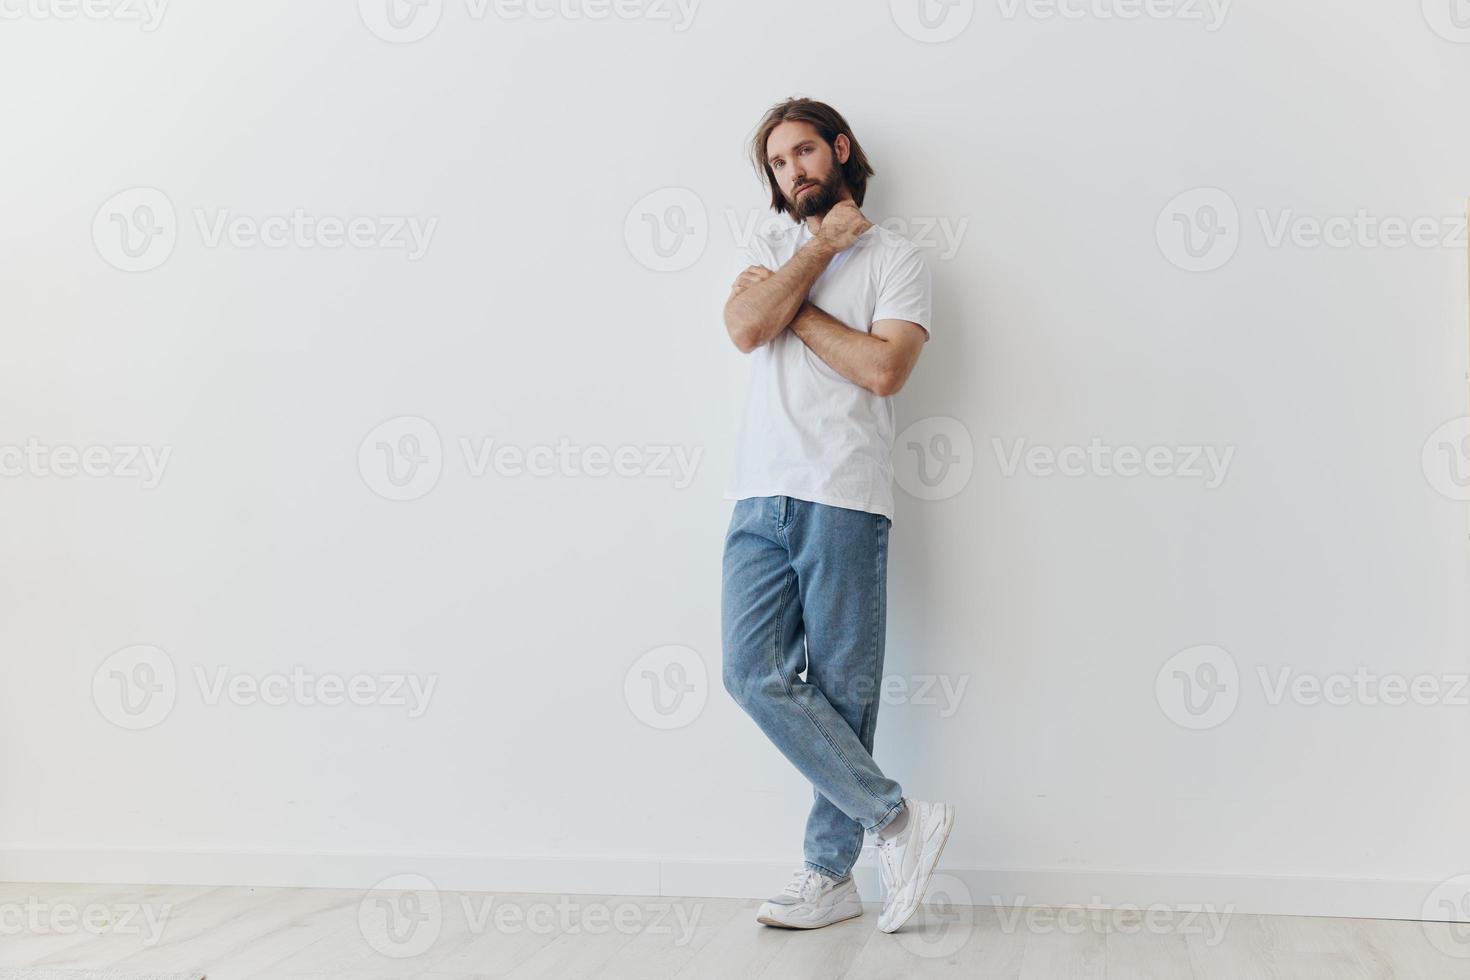 A man in a white T-shirt and blue jeans stands against a white wall and poses photo